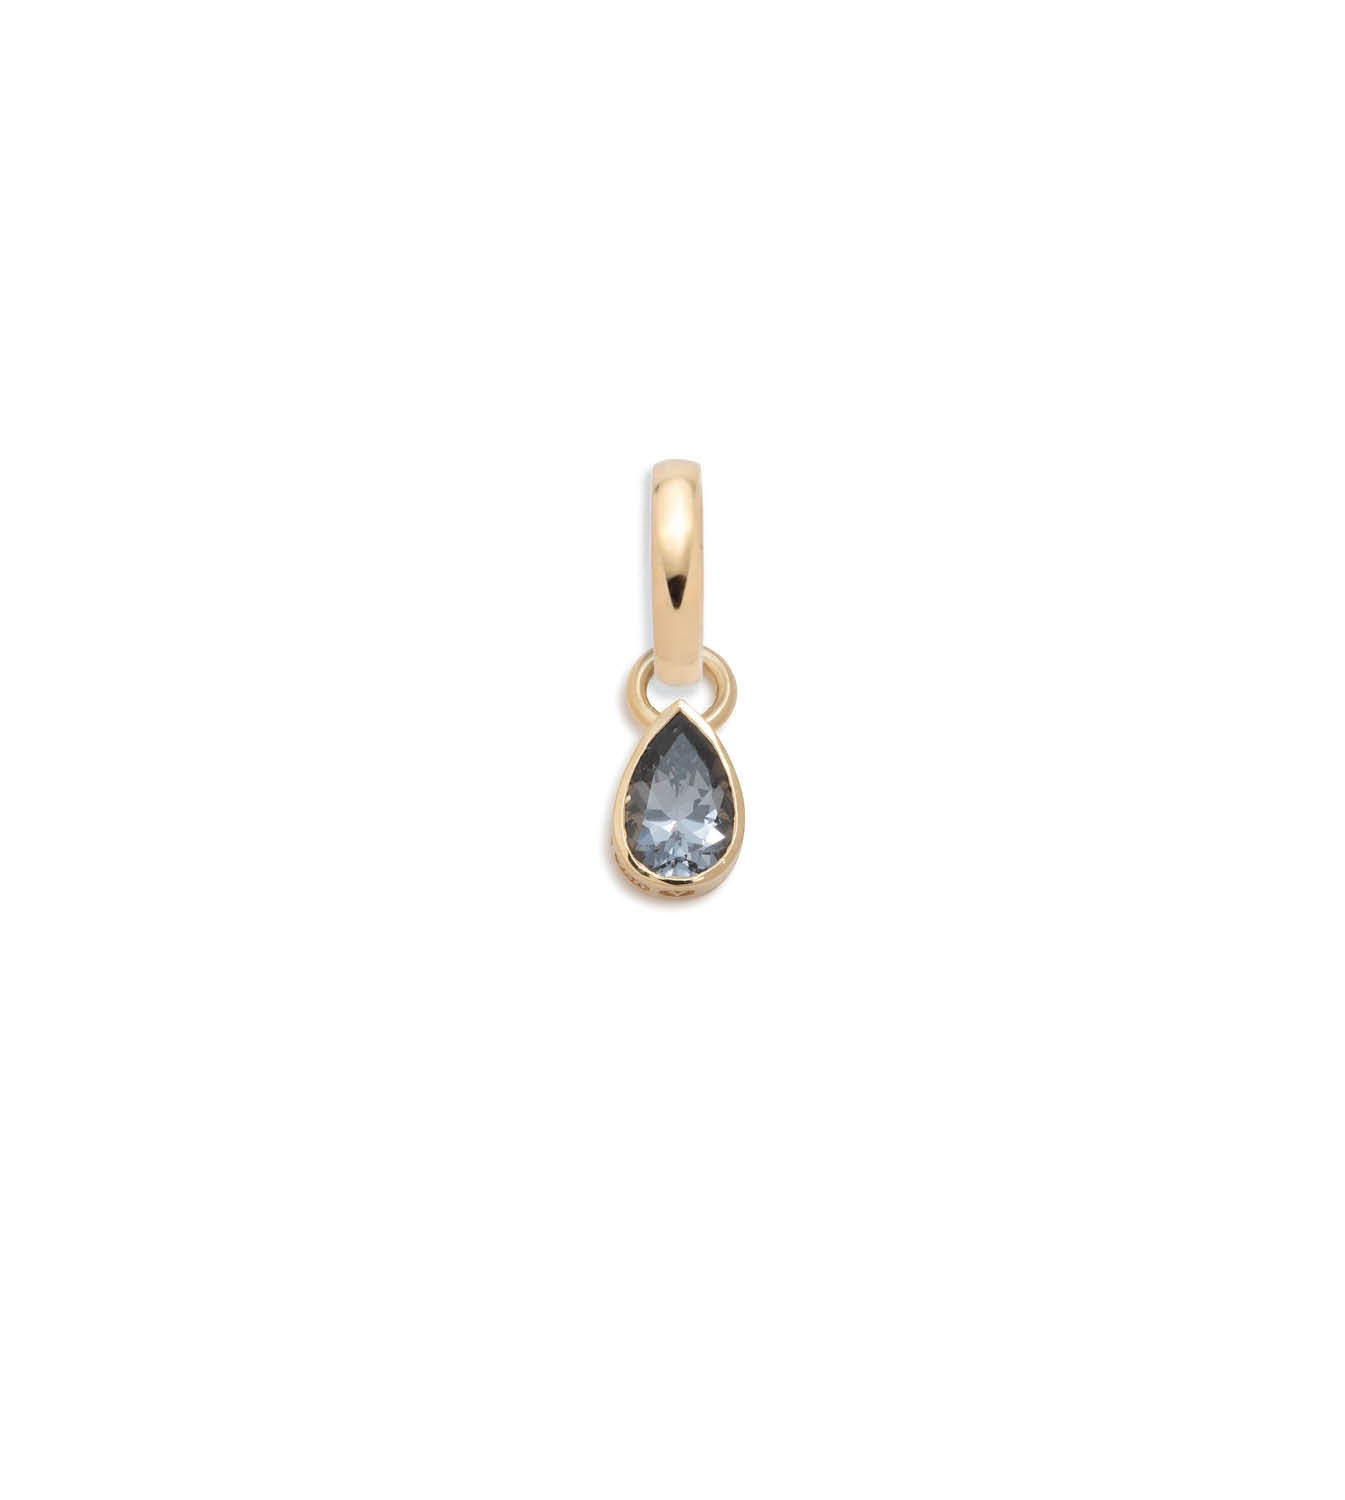 Forever & Always a Pair - Love : .45ct Grey Spinel Pear Pendant with Oval Pushgate